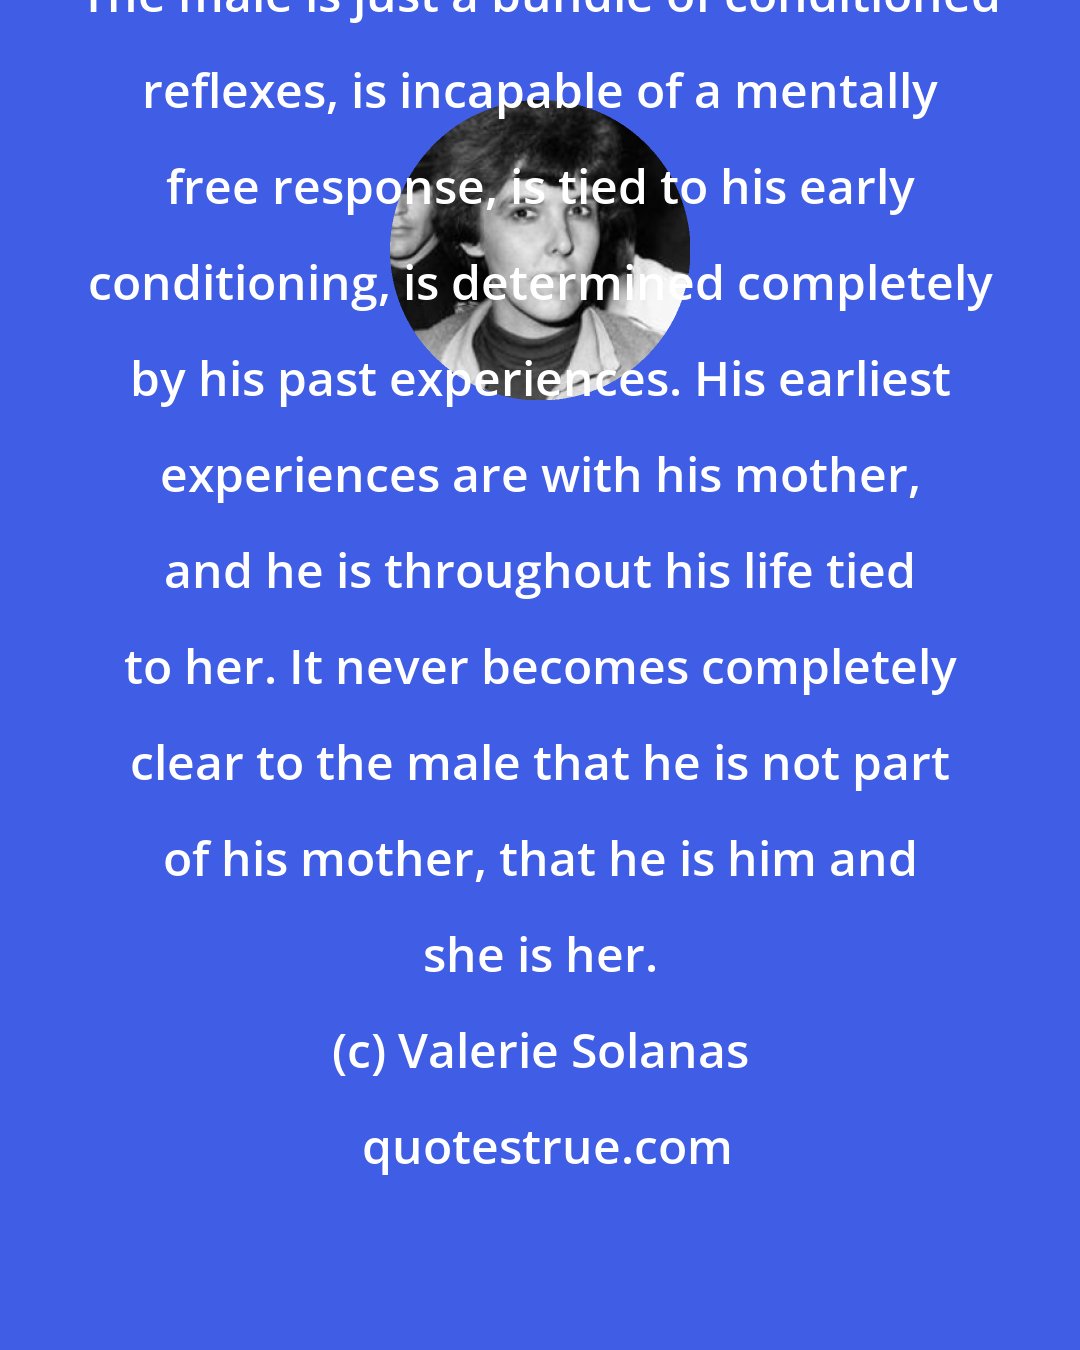 Valerie Solanas: The male is just a bundle of conditioned reflexes, is incapable of a mentally free response, is tied to his early conditioning, is determined completely by his past experiences. His earliest experiences are with his mother, and he is throughout his life tied to her. It never becomes completely clear to the male that he is not part of his mother, that he is him and she is her.